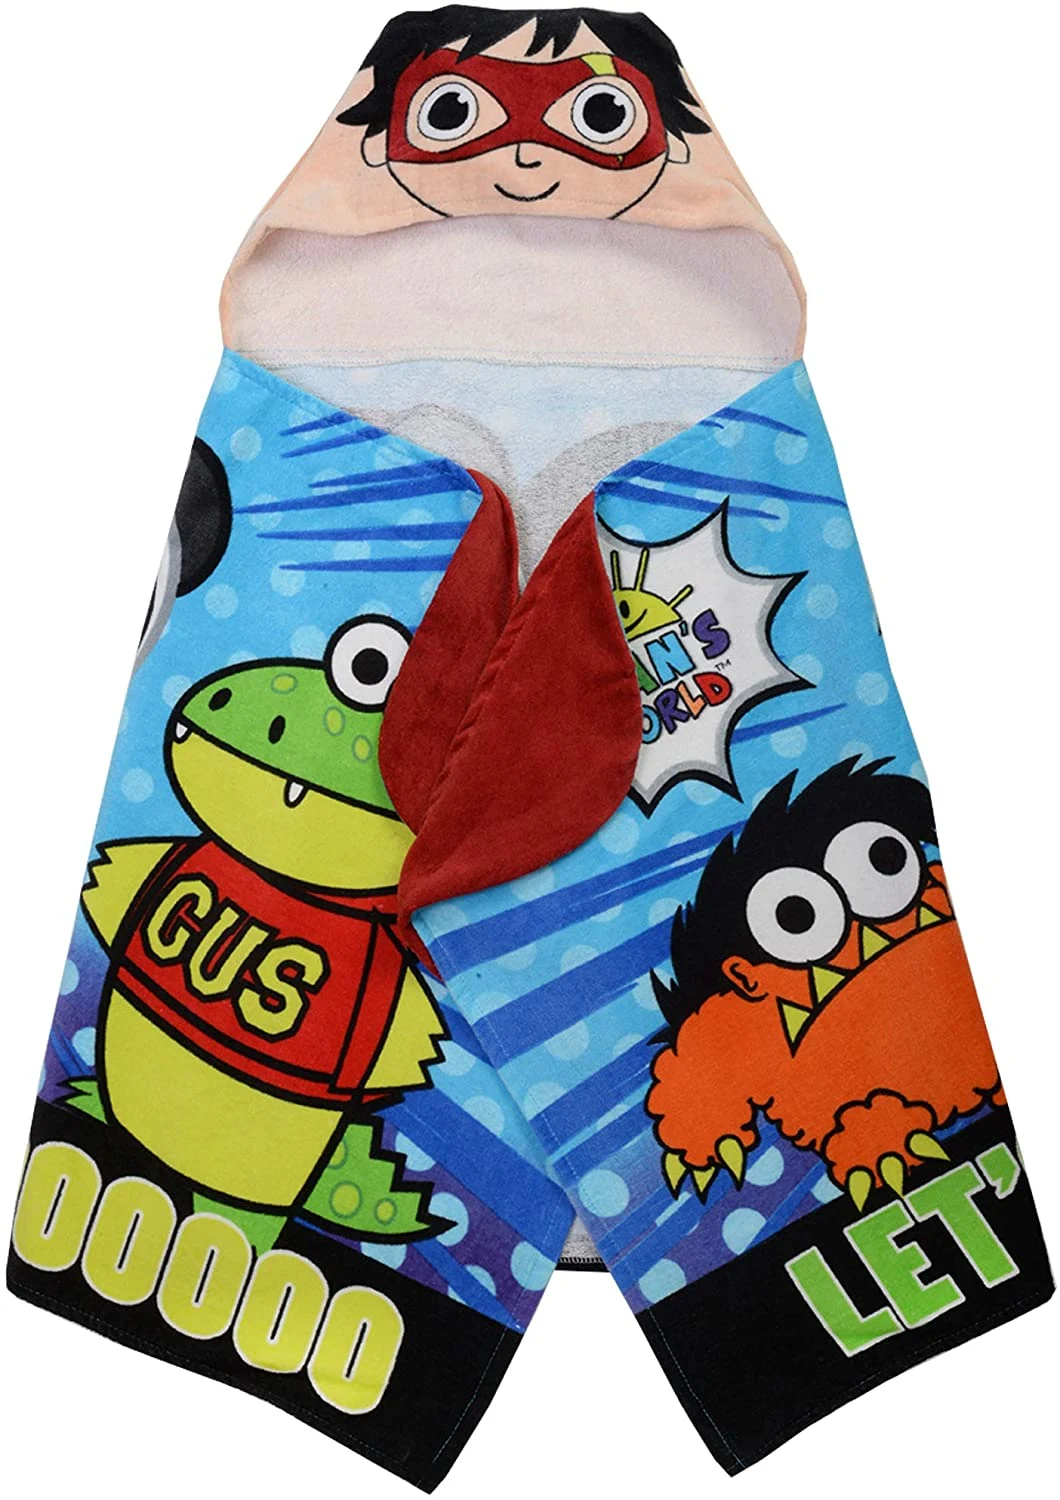 Kids Bath and Beach Soft 100% Cotton Terry Hooded Towel Wrap